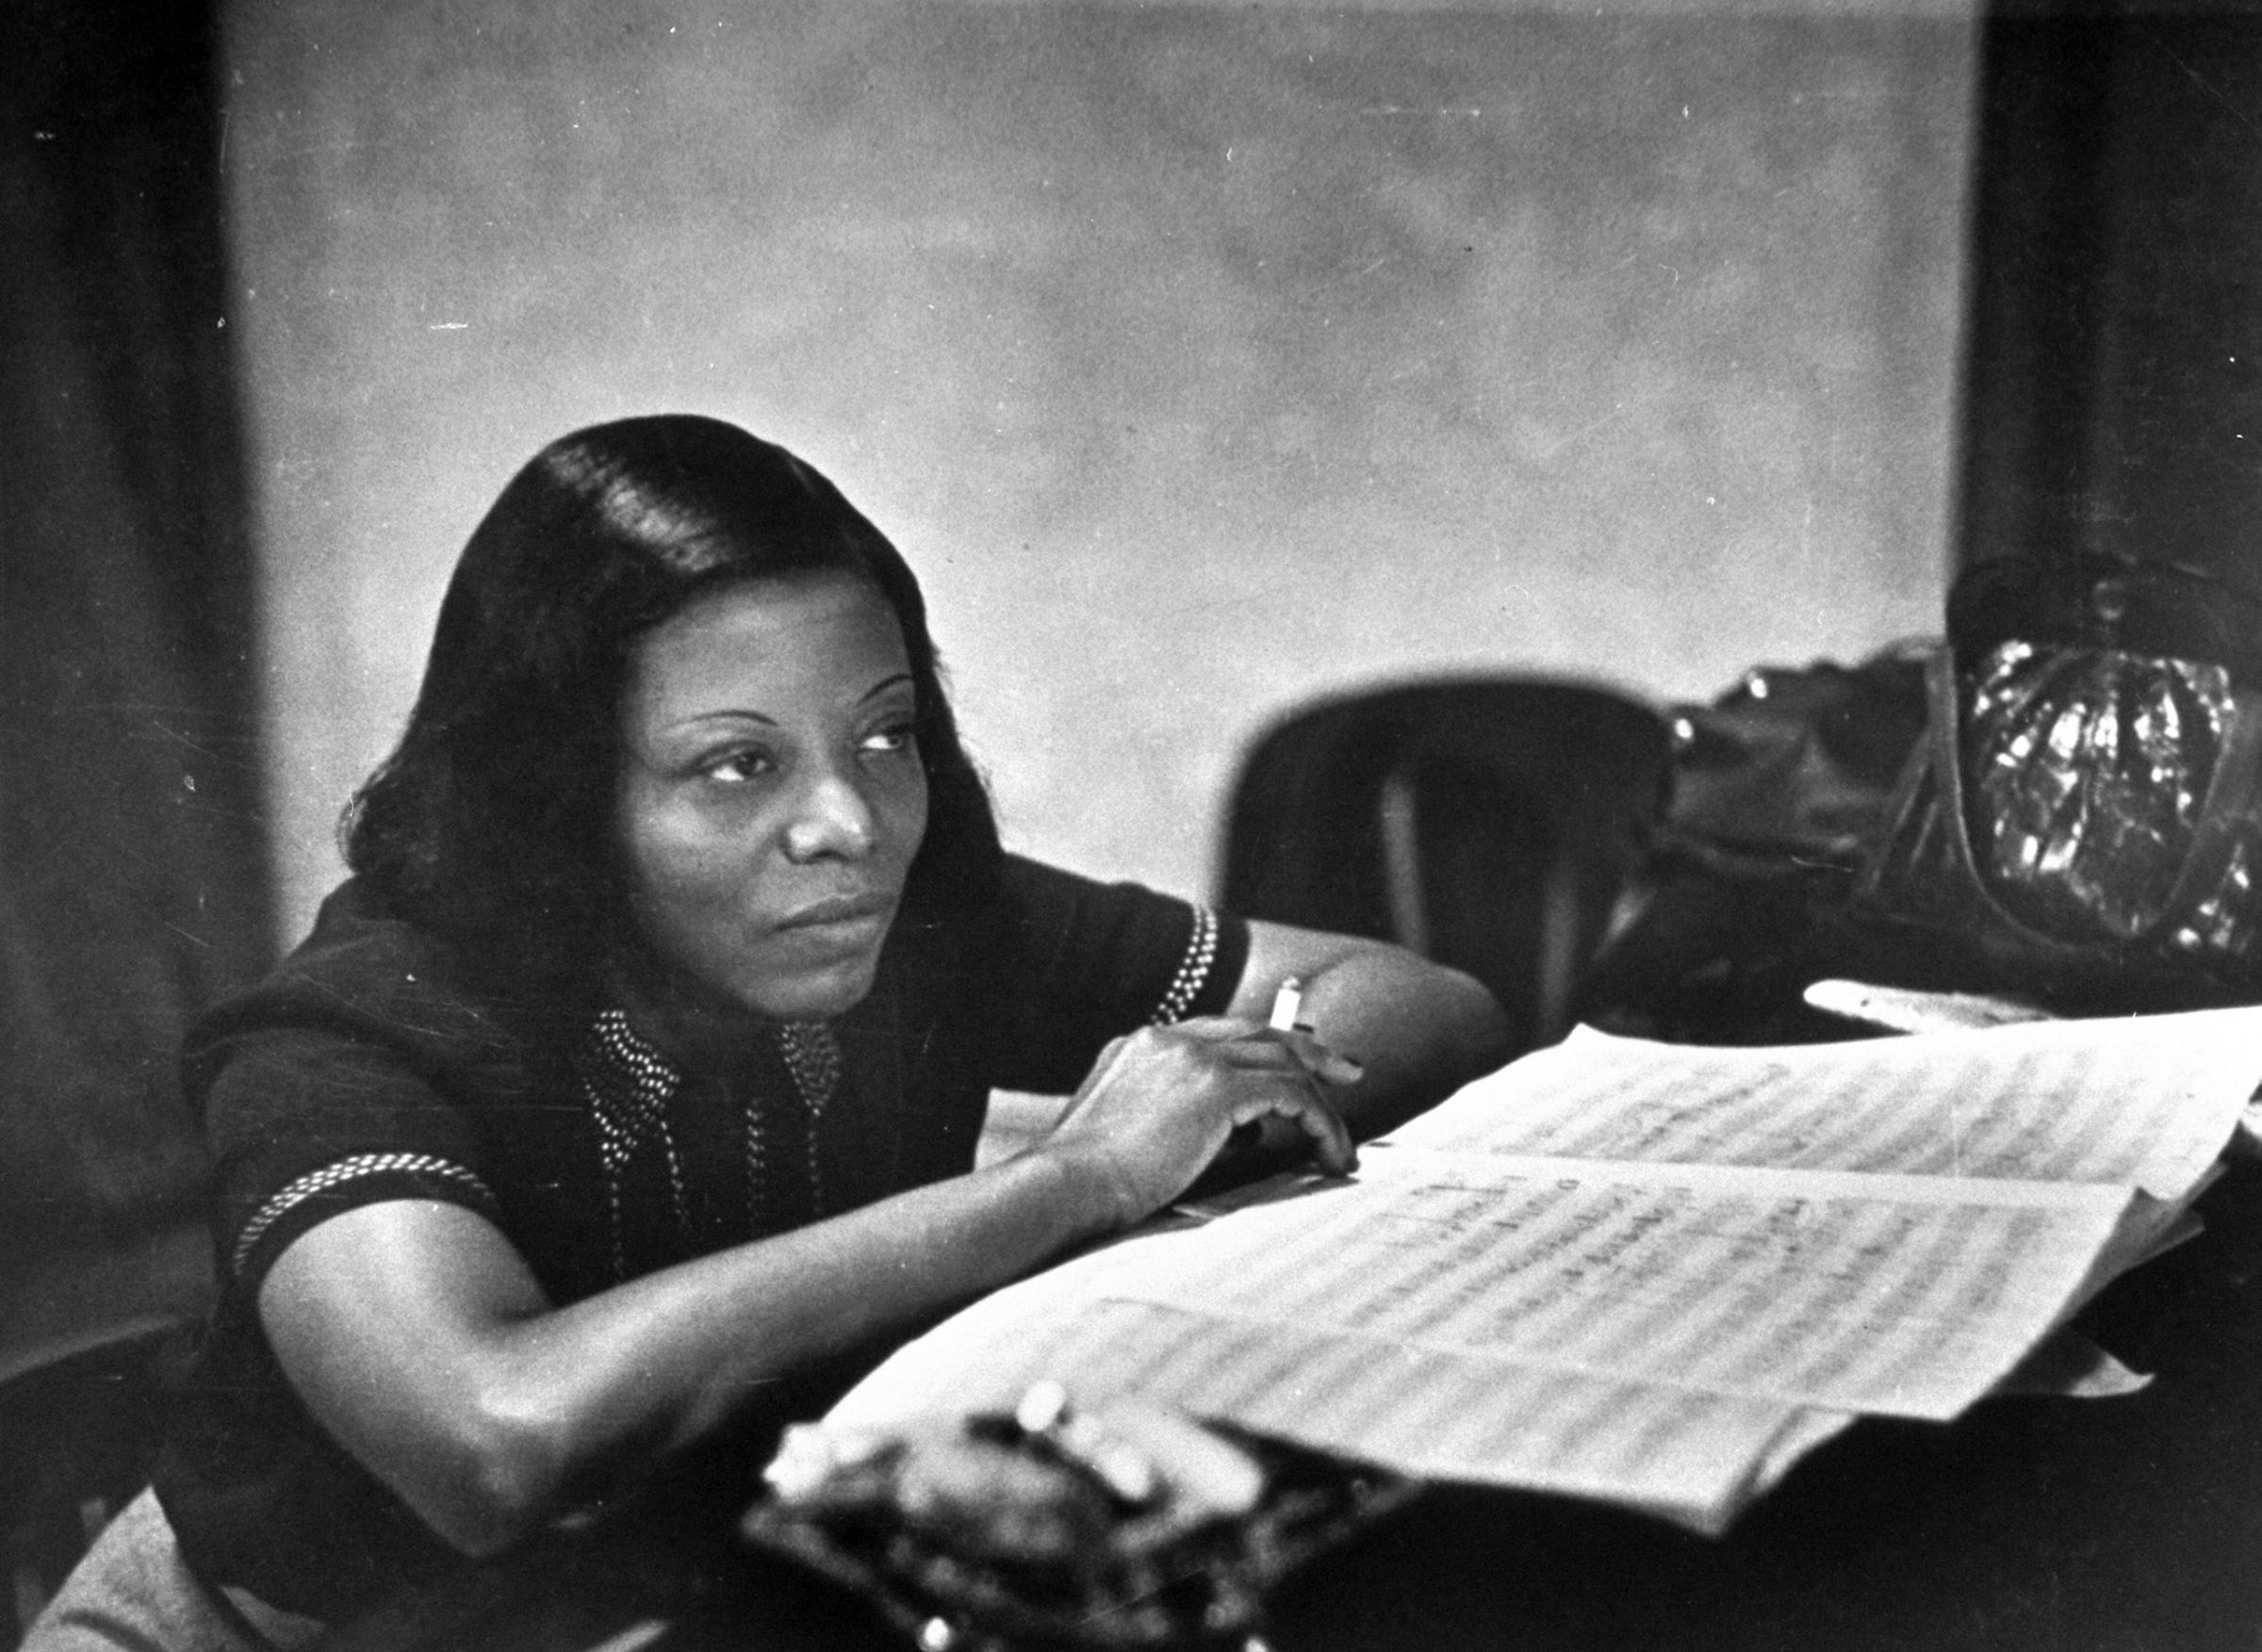 Jazz musician Mary Lou Williams, music in front of her, listening to playback of recording she has just made.